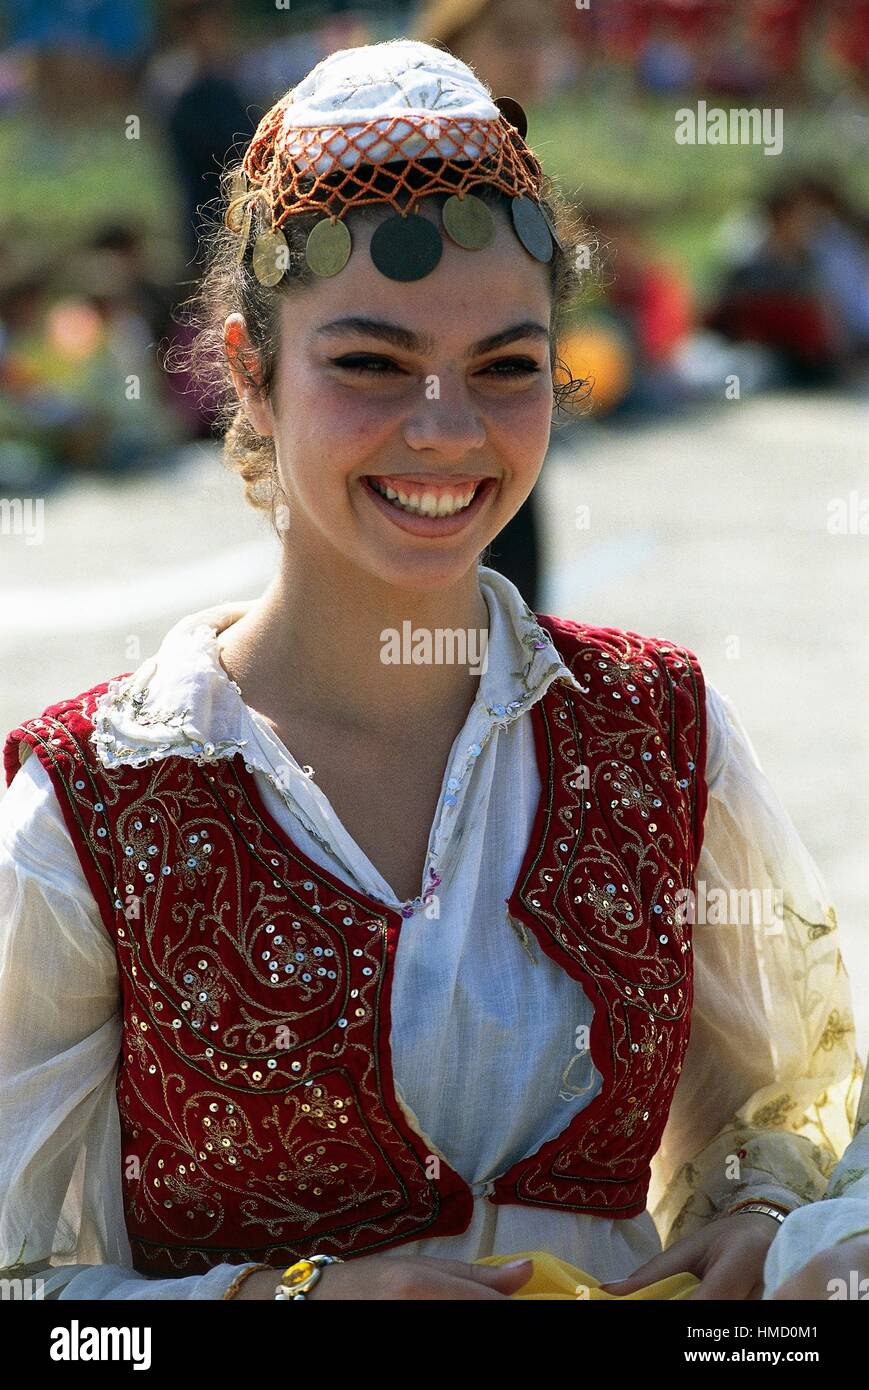 woman-in-traditional-costume-during-nowruz-day-spring-festival-tirana-HMD0M1.jpg